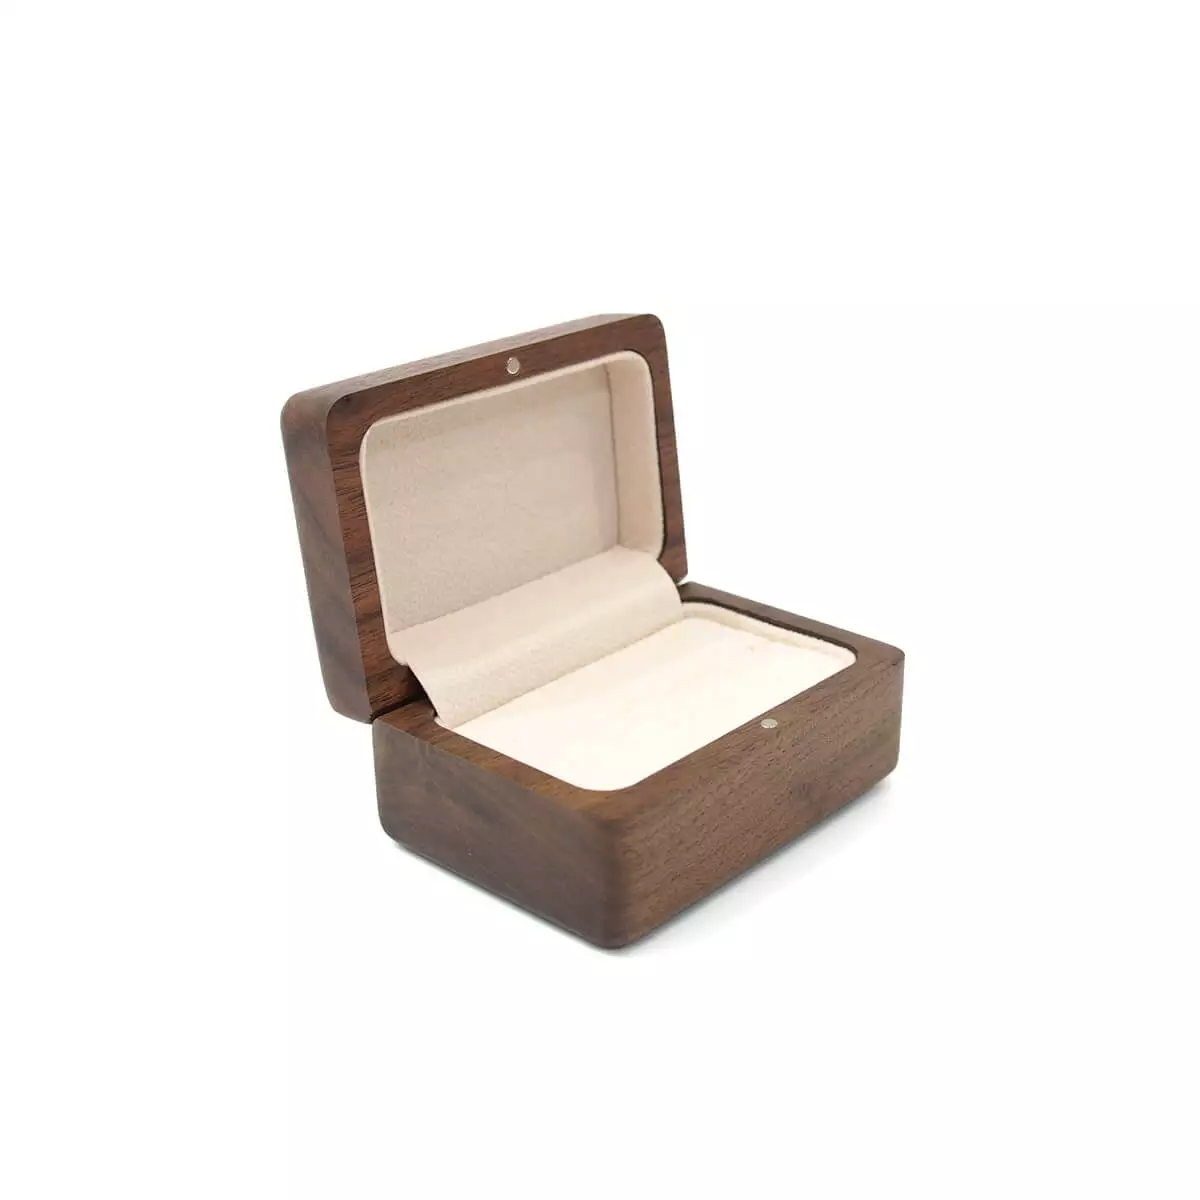 bowie ring box in oak brown 2 ring slots left side view